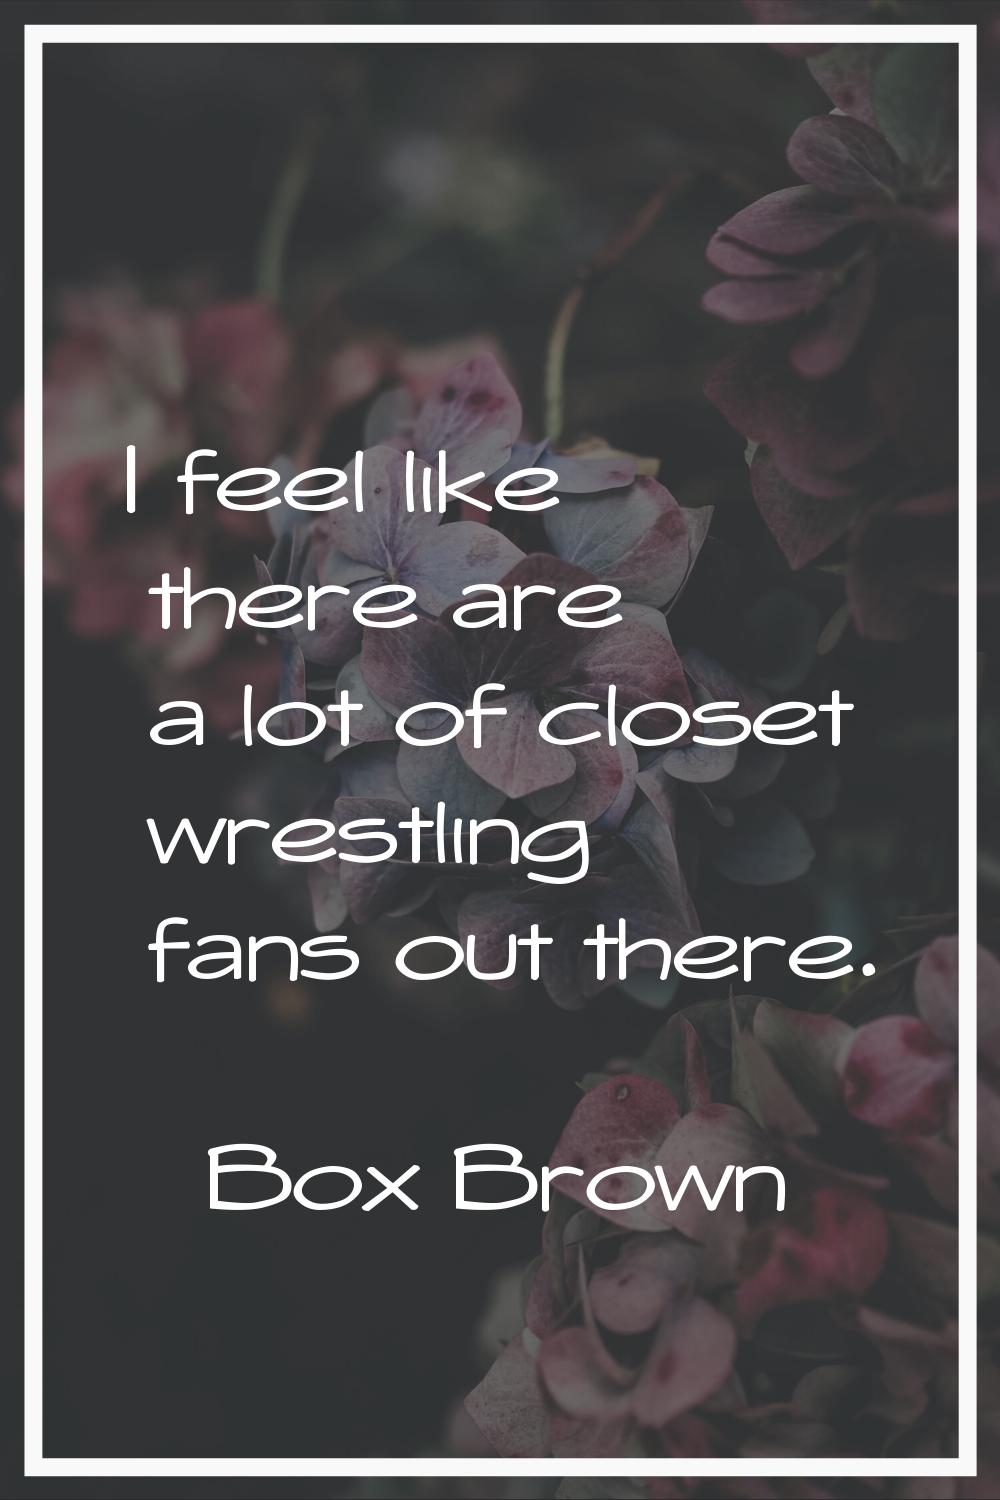 I feel like there are a lot of closet wrestling fans out there.